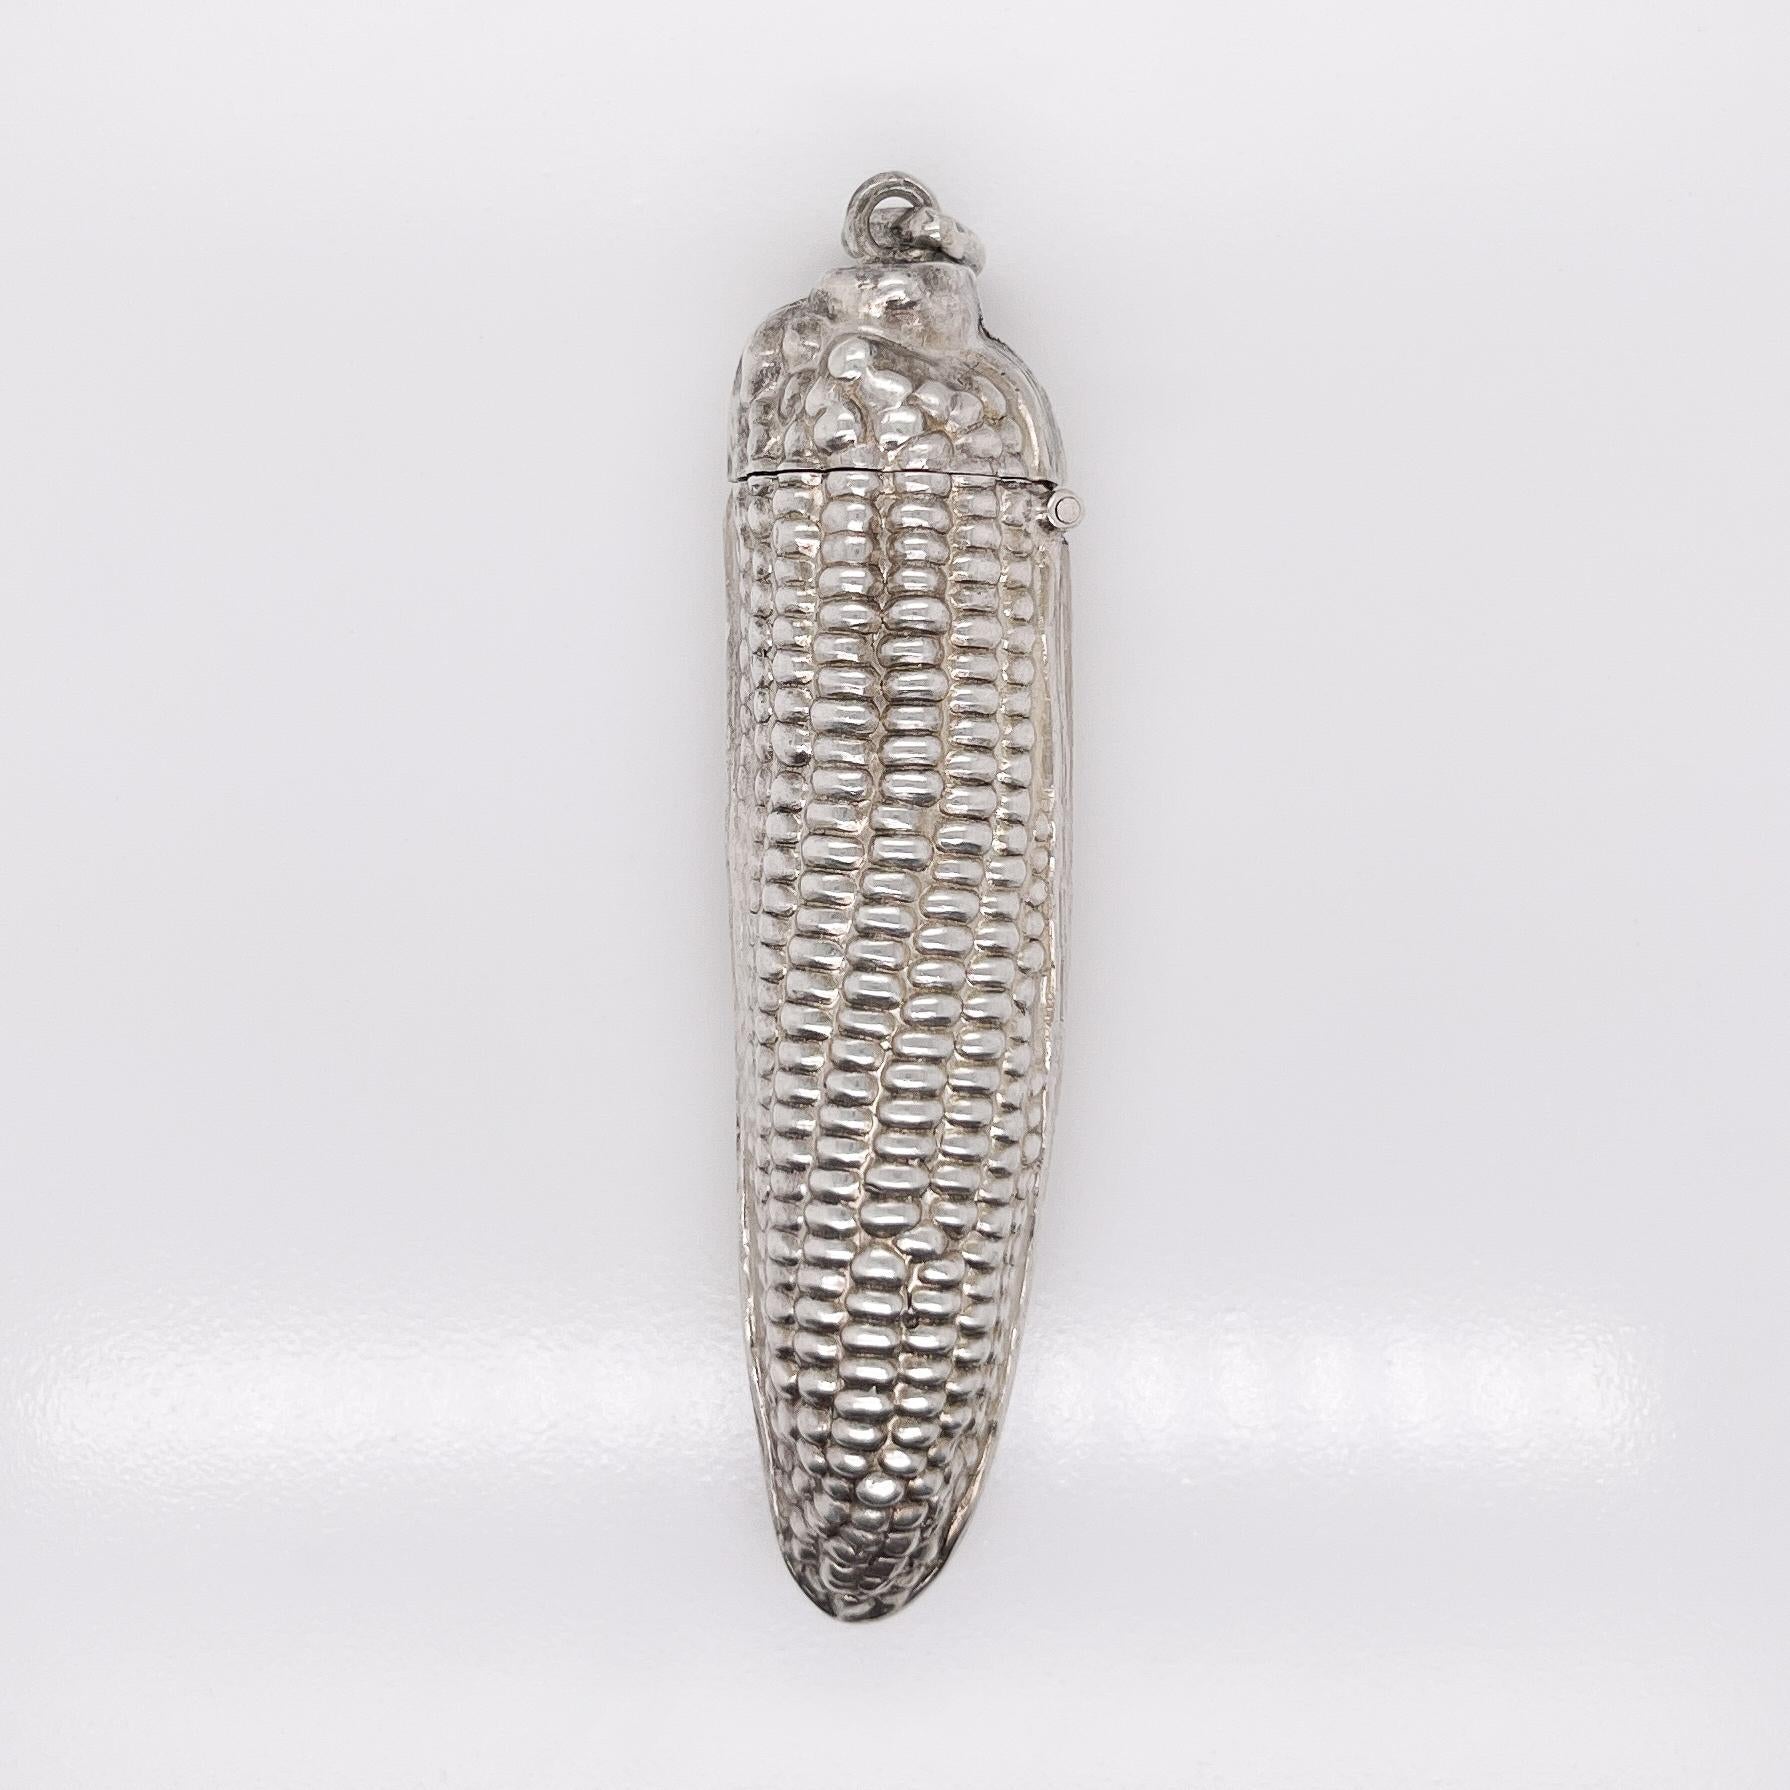 A silver pendant snuff box.

In the form of a half husked corn on the cob with rows of corn grains and the veining of the leaves in high relief.

Fixed with a jump ring for attaching to a chatelaine or to wear as a pendant in a necklace.

Simply a